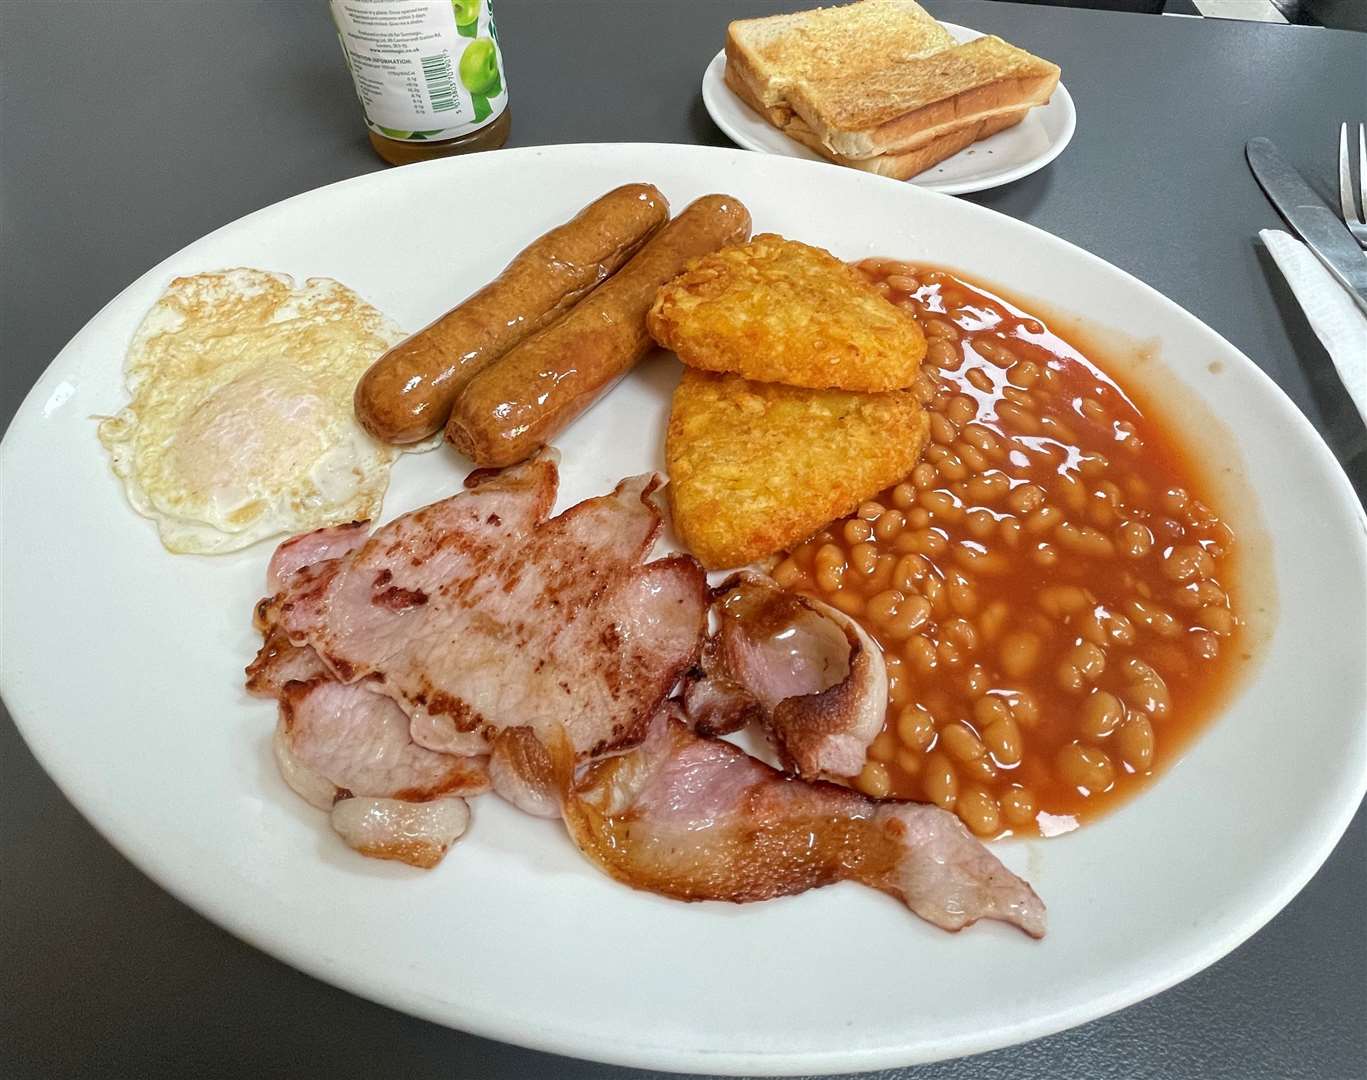 A large breakfast with apple juice set me back £9.90